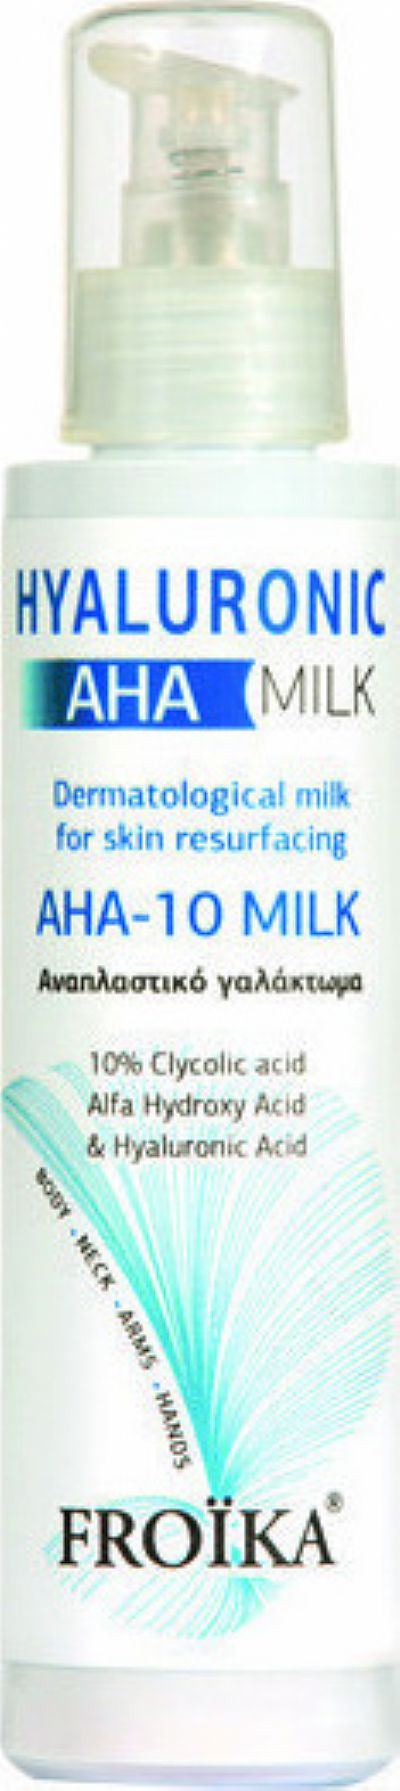 FROIKA, HYALURONIC ΑΗΑ 10 MILK 125ml